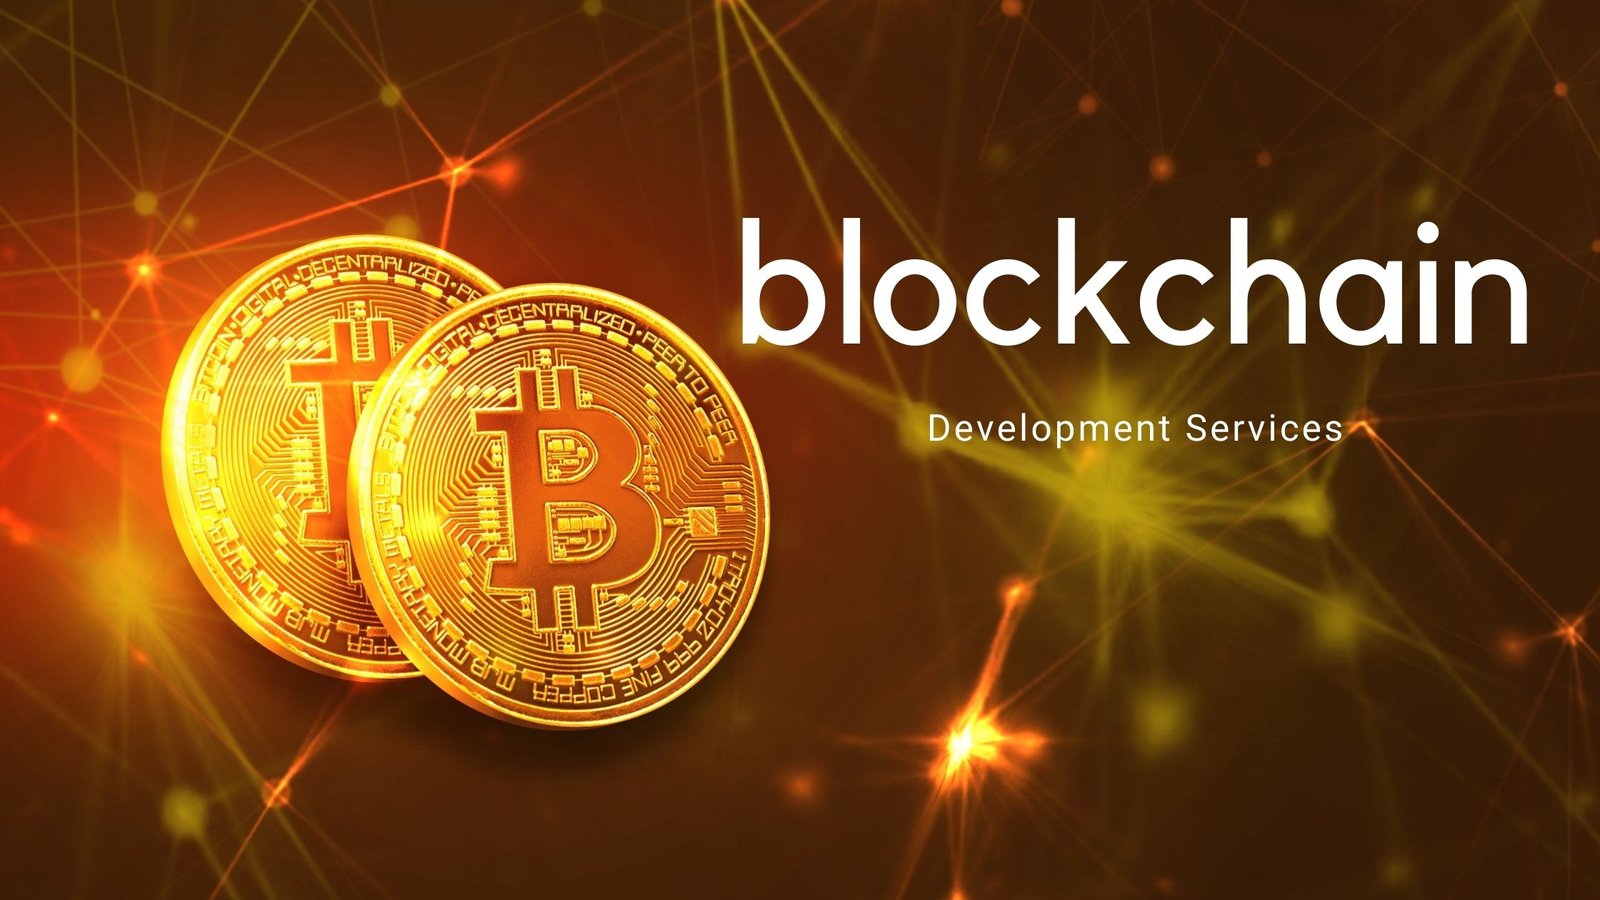 3 Ways Blockchain Development Services Can Benefit The Education System